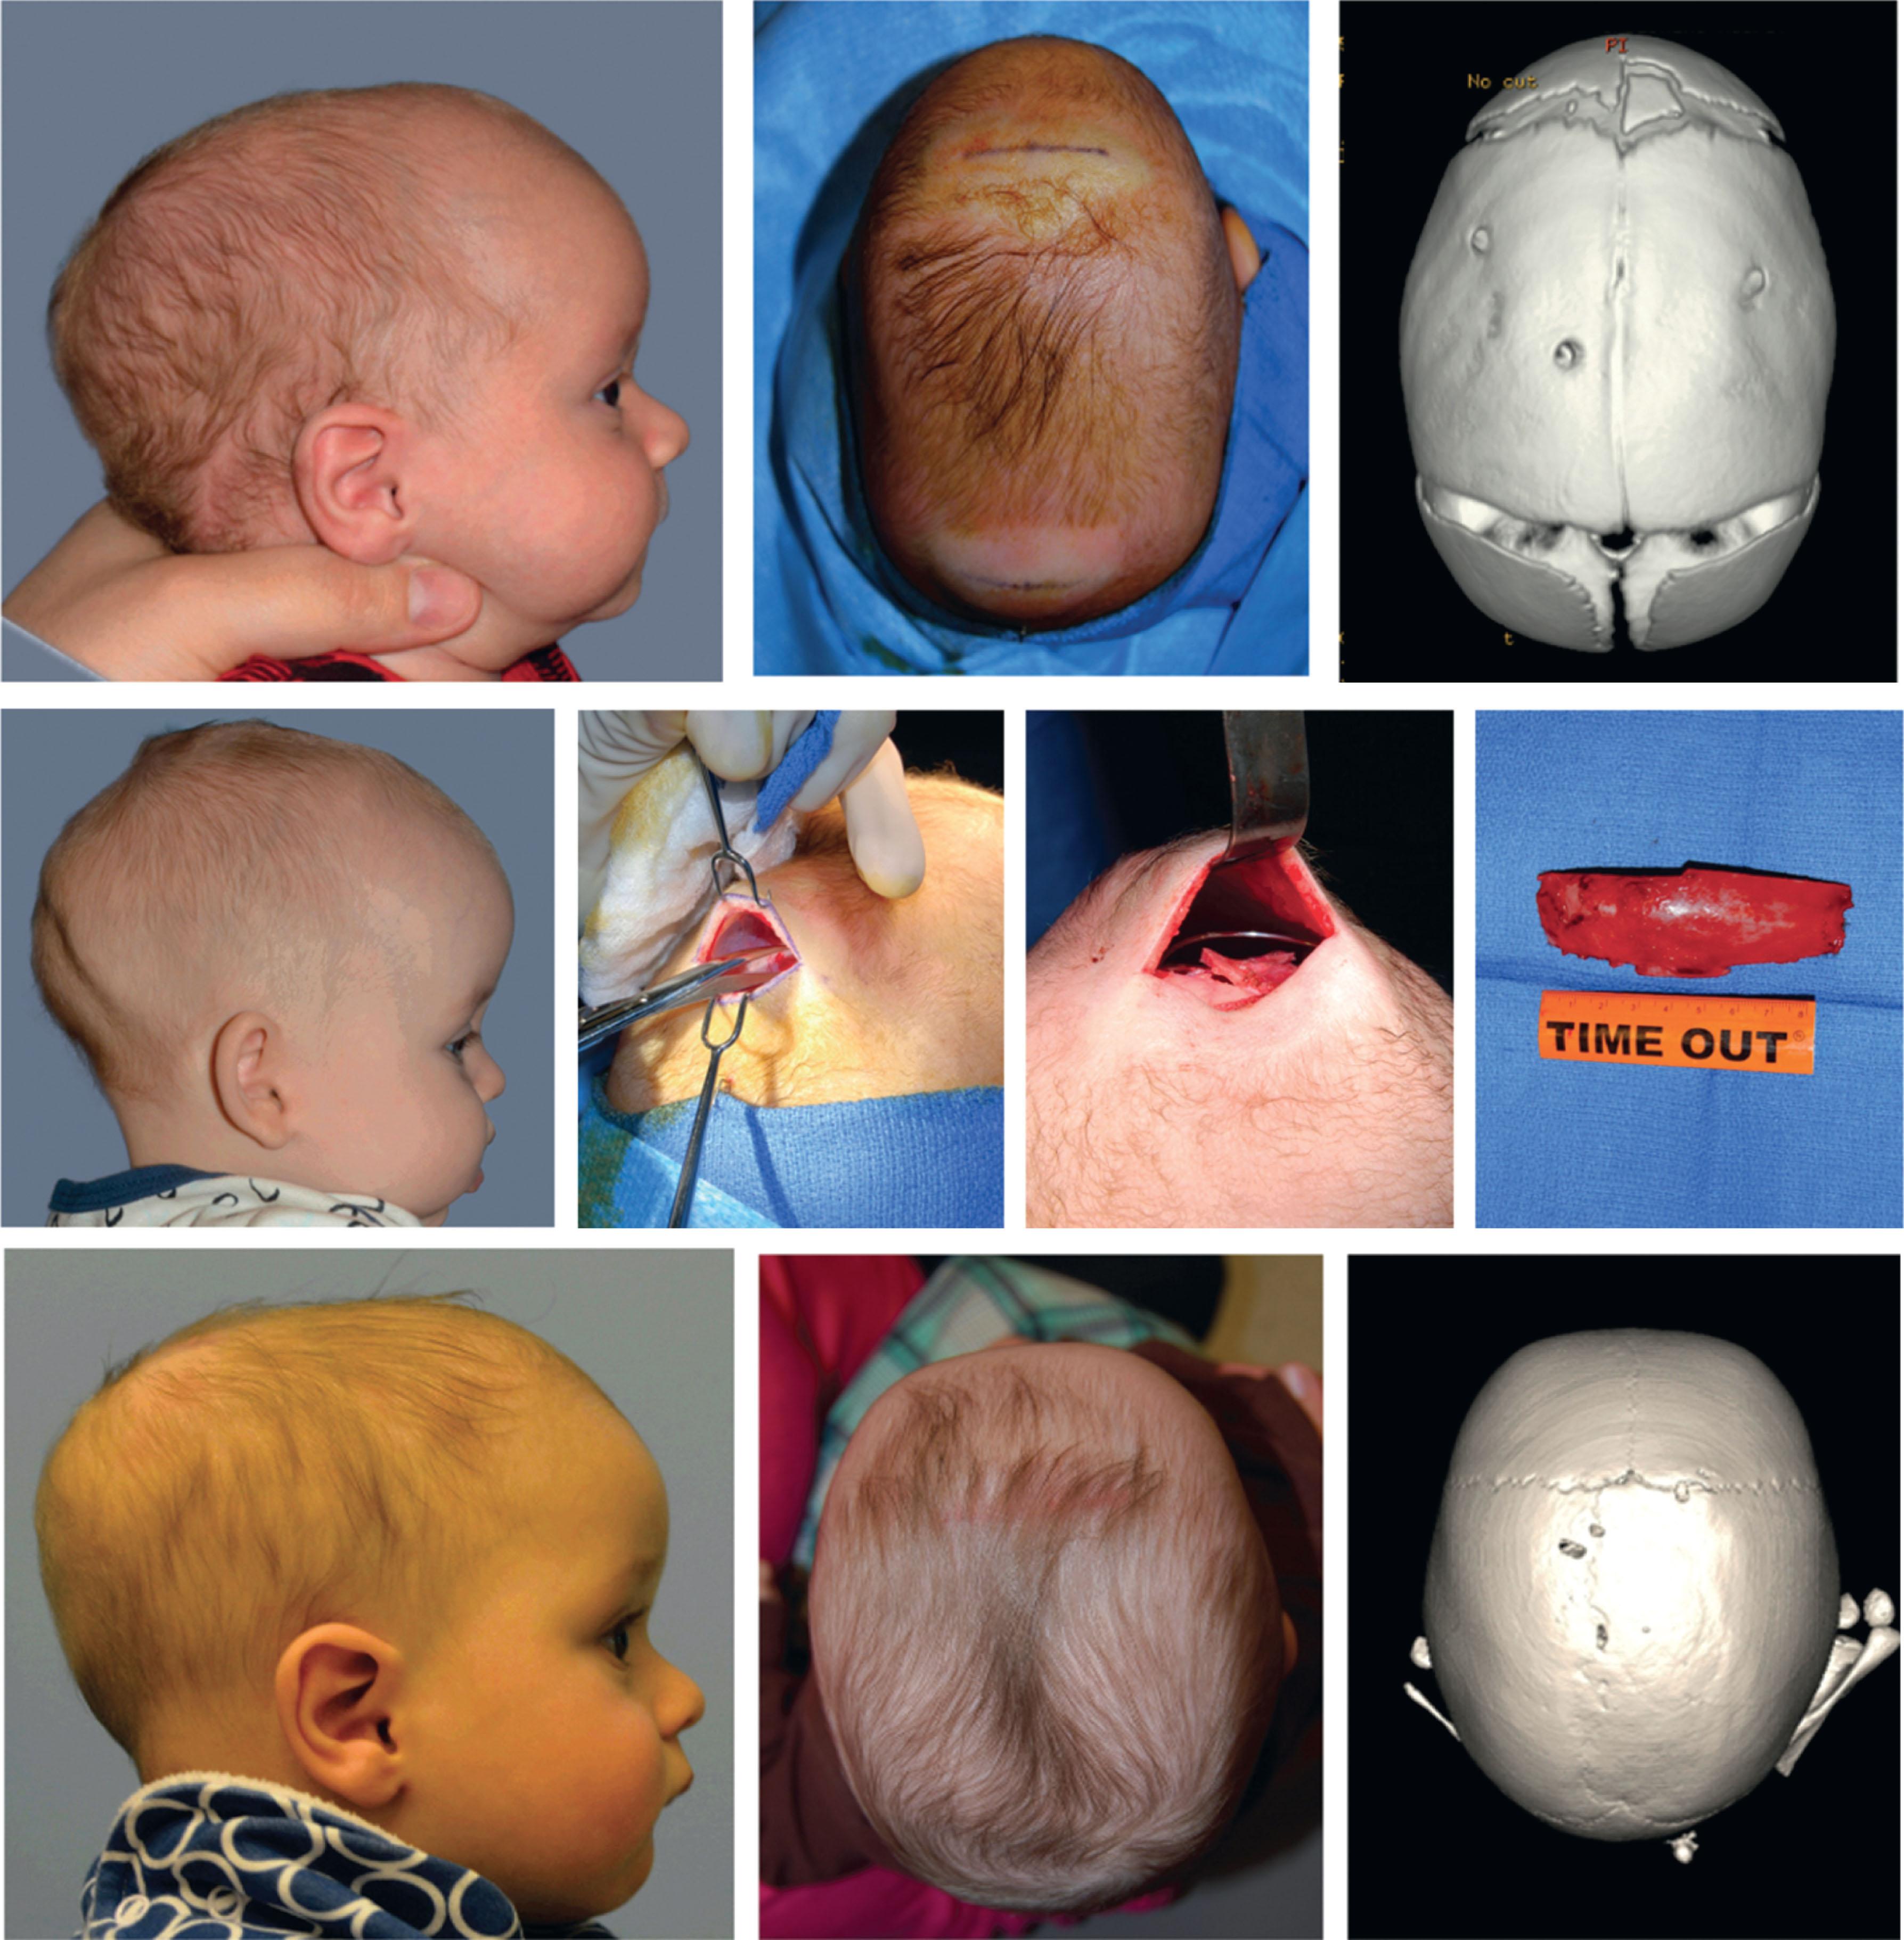 Figure 25.2.1, Spring-mediated cranioplasty. 3.5-month-old male presenting with characteristic scaphocephaly consistent with sagittal craniosynostosis ( top ). Through two ~4-cm incisions near bregma and lambda, the synostotic suture is removed, two (or three) cranial springs are placed, and the removed bone morselized and replaced across the suturectomy site. Lifting of the parietal plates across the coronal and lambdoid sutures confirms appropriate spring expansion during the early postoperative period ( middle ). 6-months postoperatively, the patient demonstrates a normocephalic head shape.